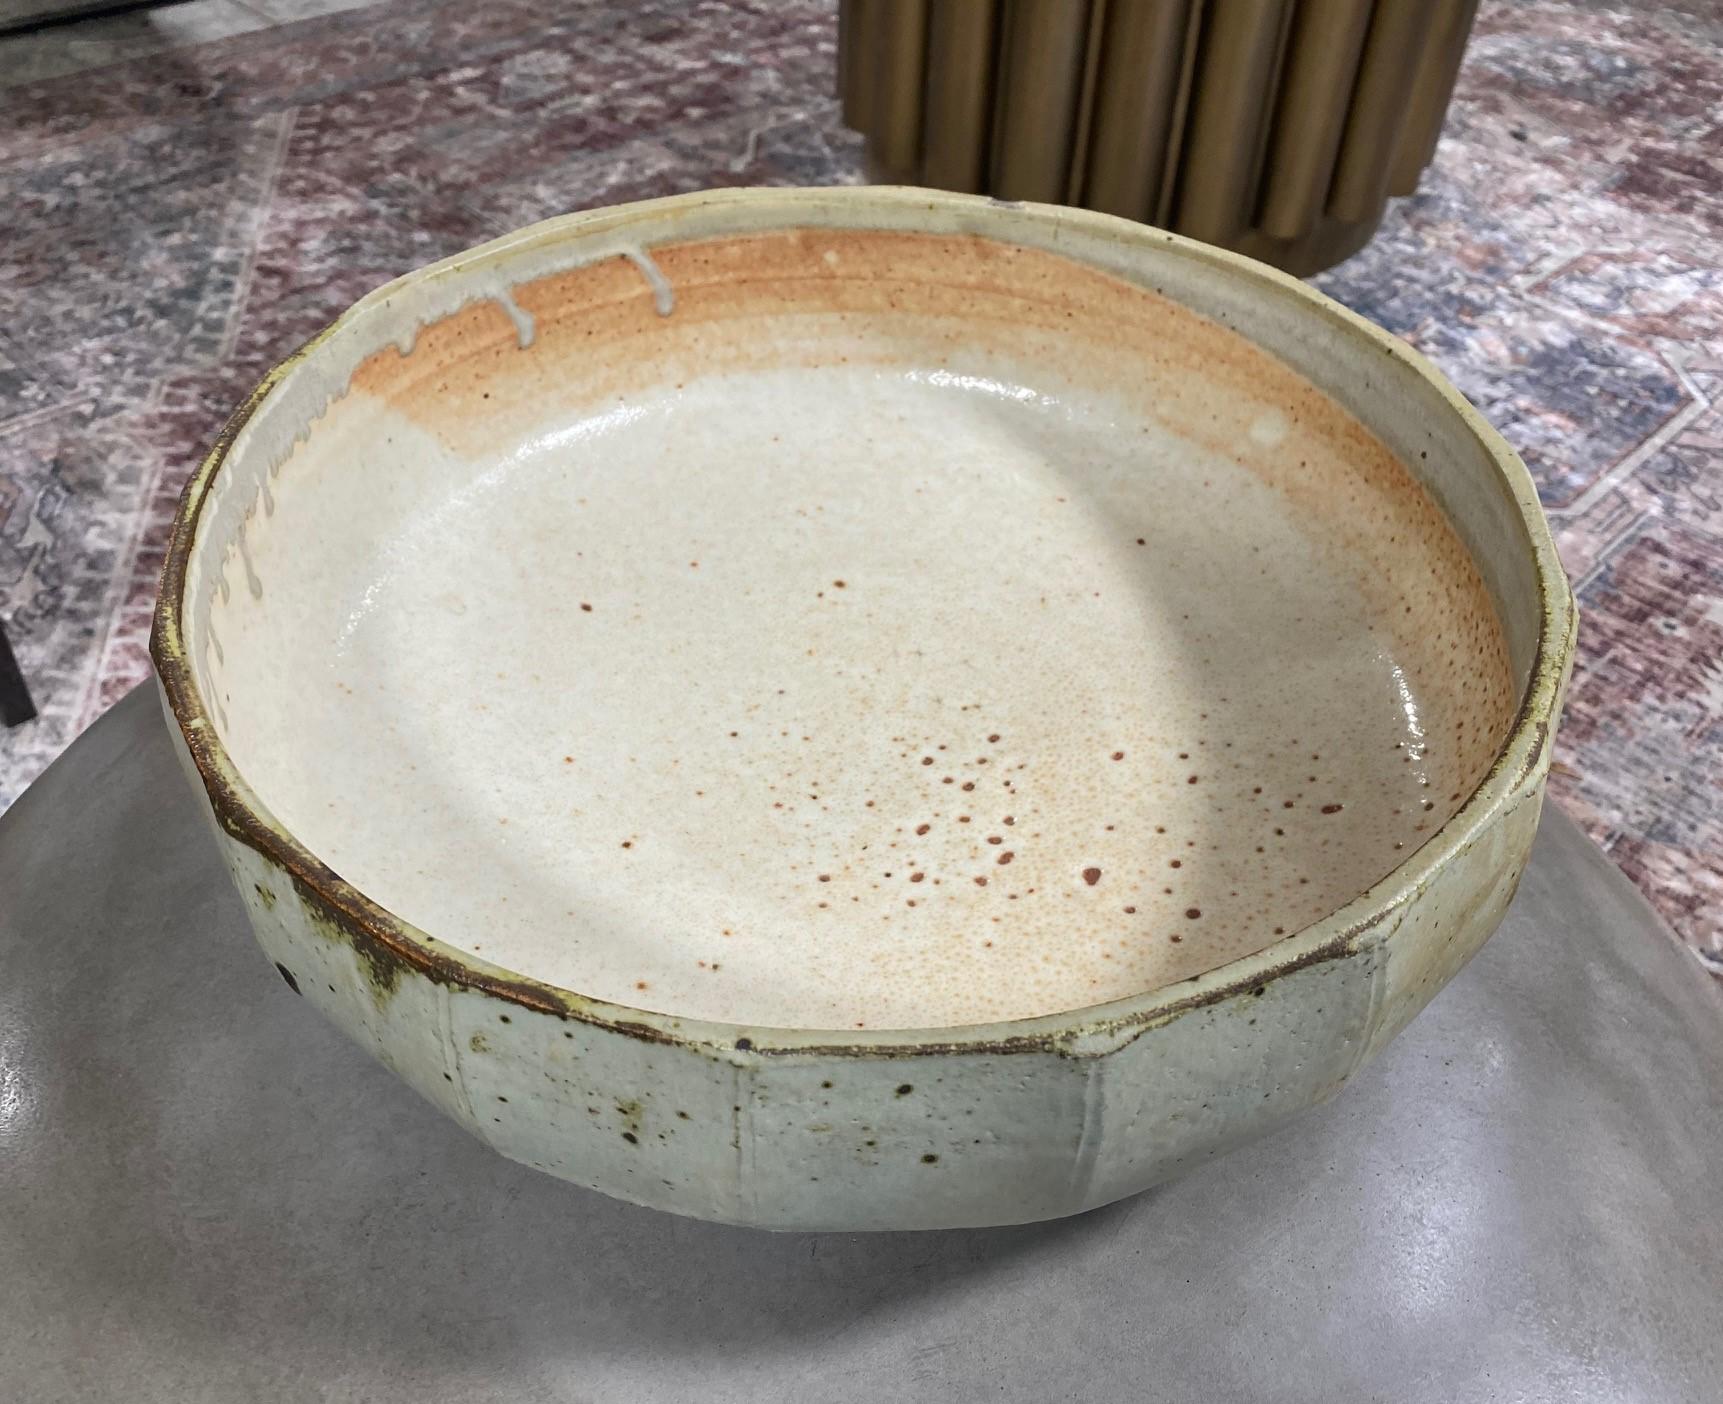 An absolutely stunning work by 20th century master American and renowned Minnesota studio potter / artist Warren MacKenzie. Truly the best piece of his we have come across. This drop rim Shino glazed bowl is monumental in all aspects. Museum-quality